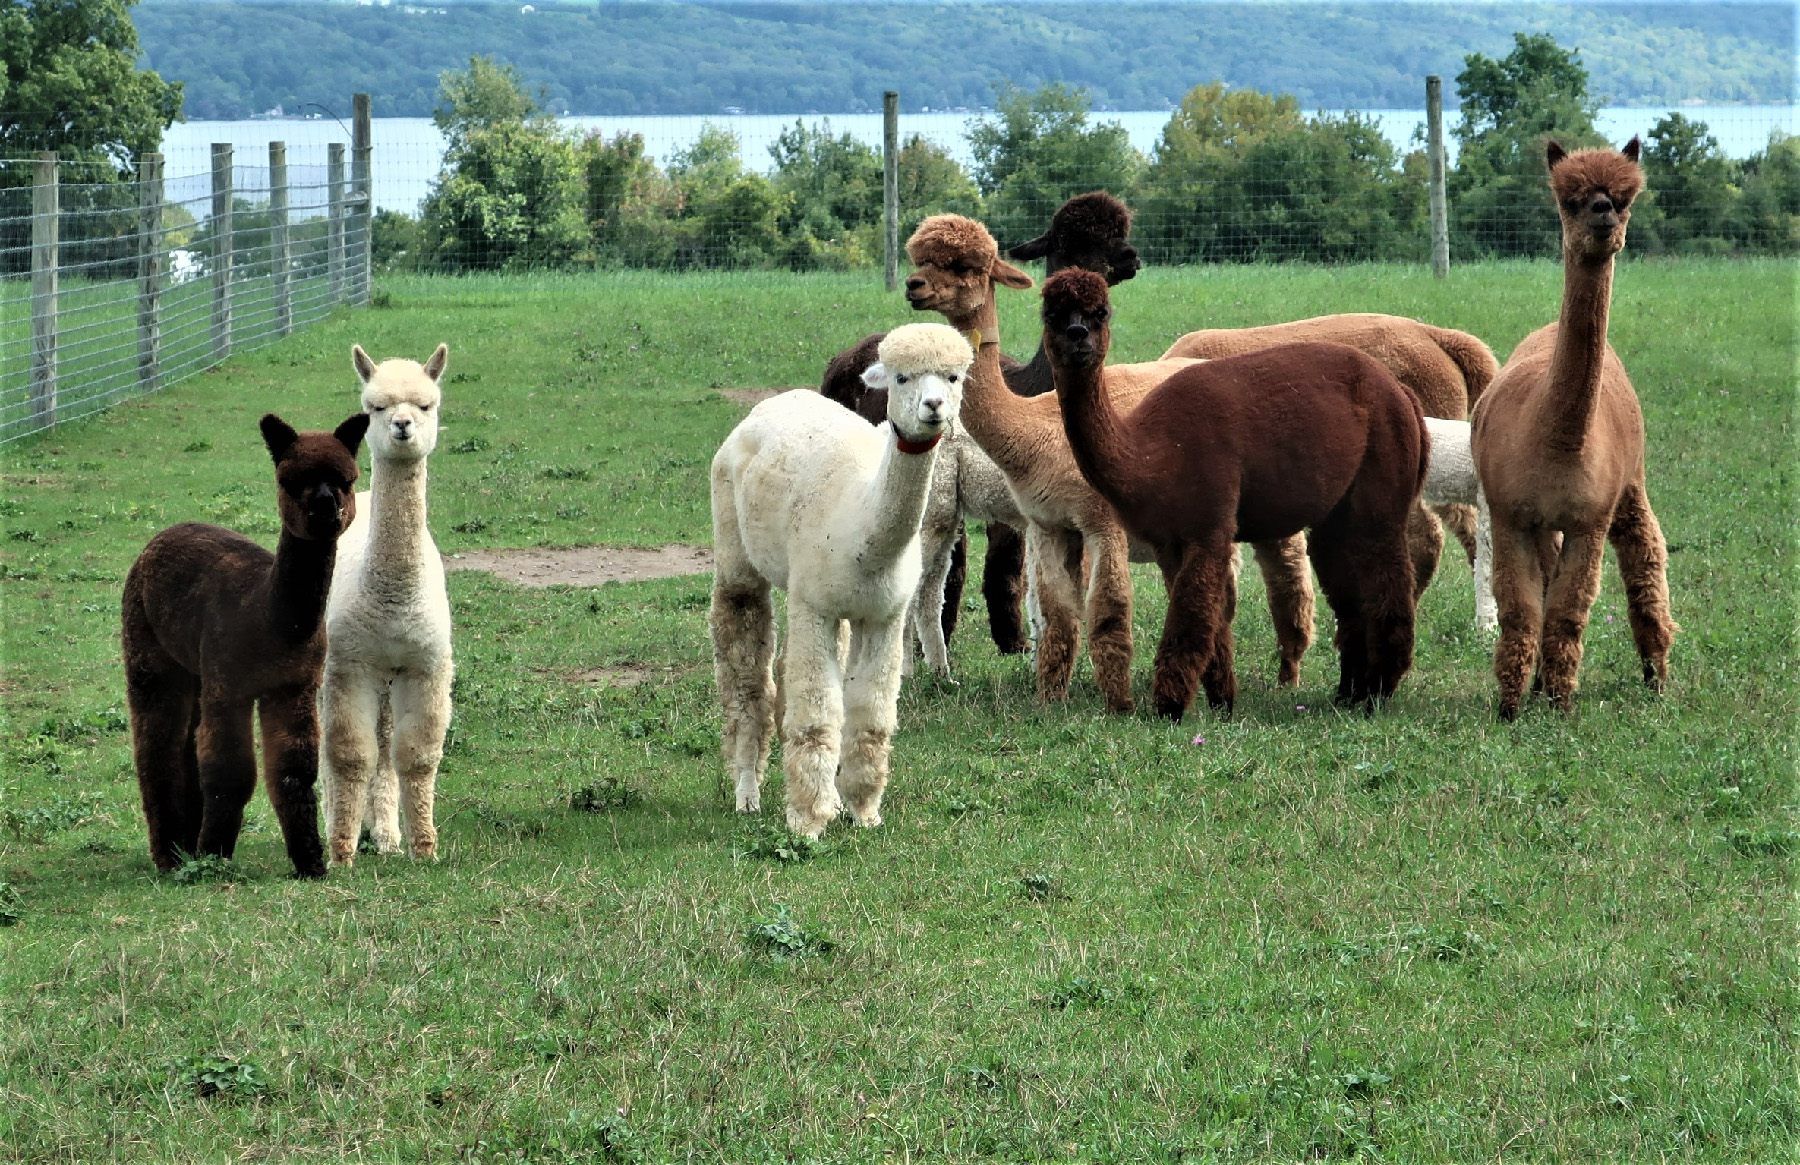 Visitors to Cabin View Alpaca Farm near Ithaca, New York, get to interact with the adorable creatures.